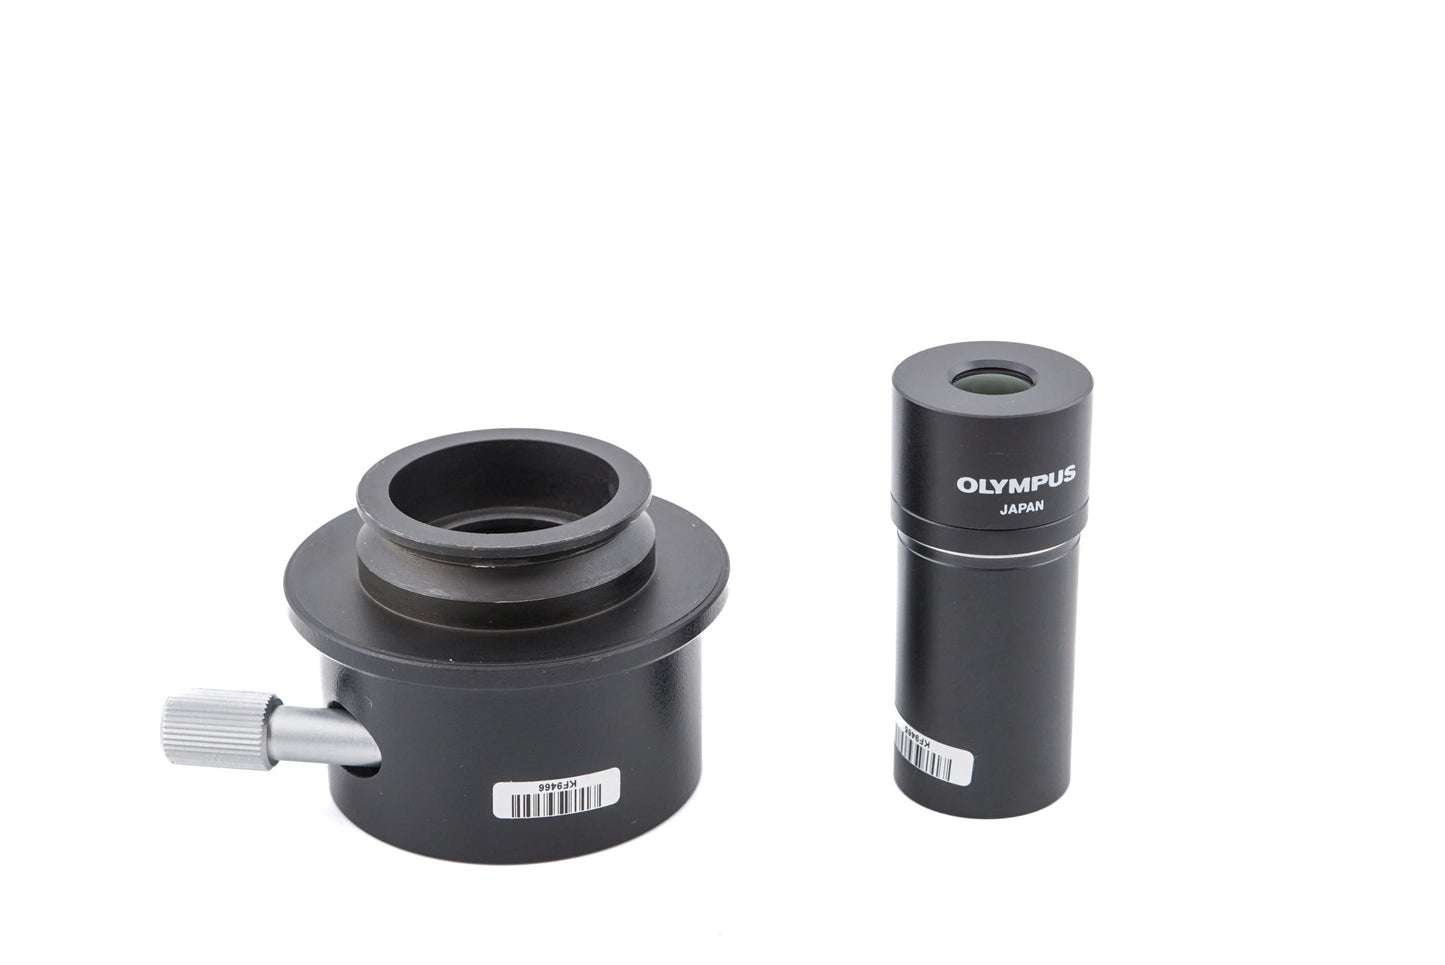 Olympus Photomicro Adapter L + NFK 3.3x LD Photo Microscope Eyepiece + PM-ADF Eyepiece Adapter